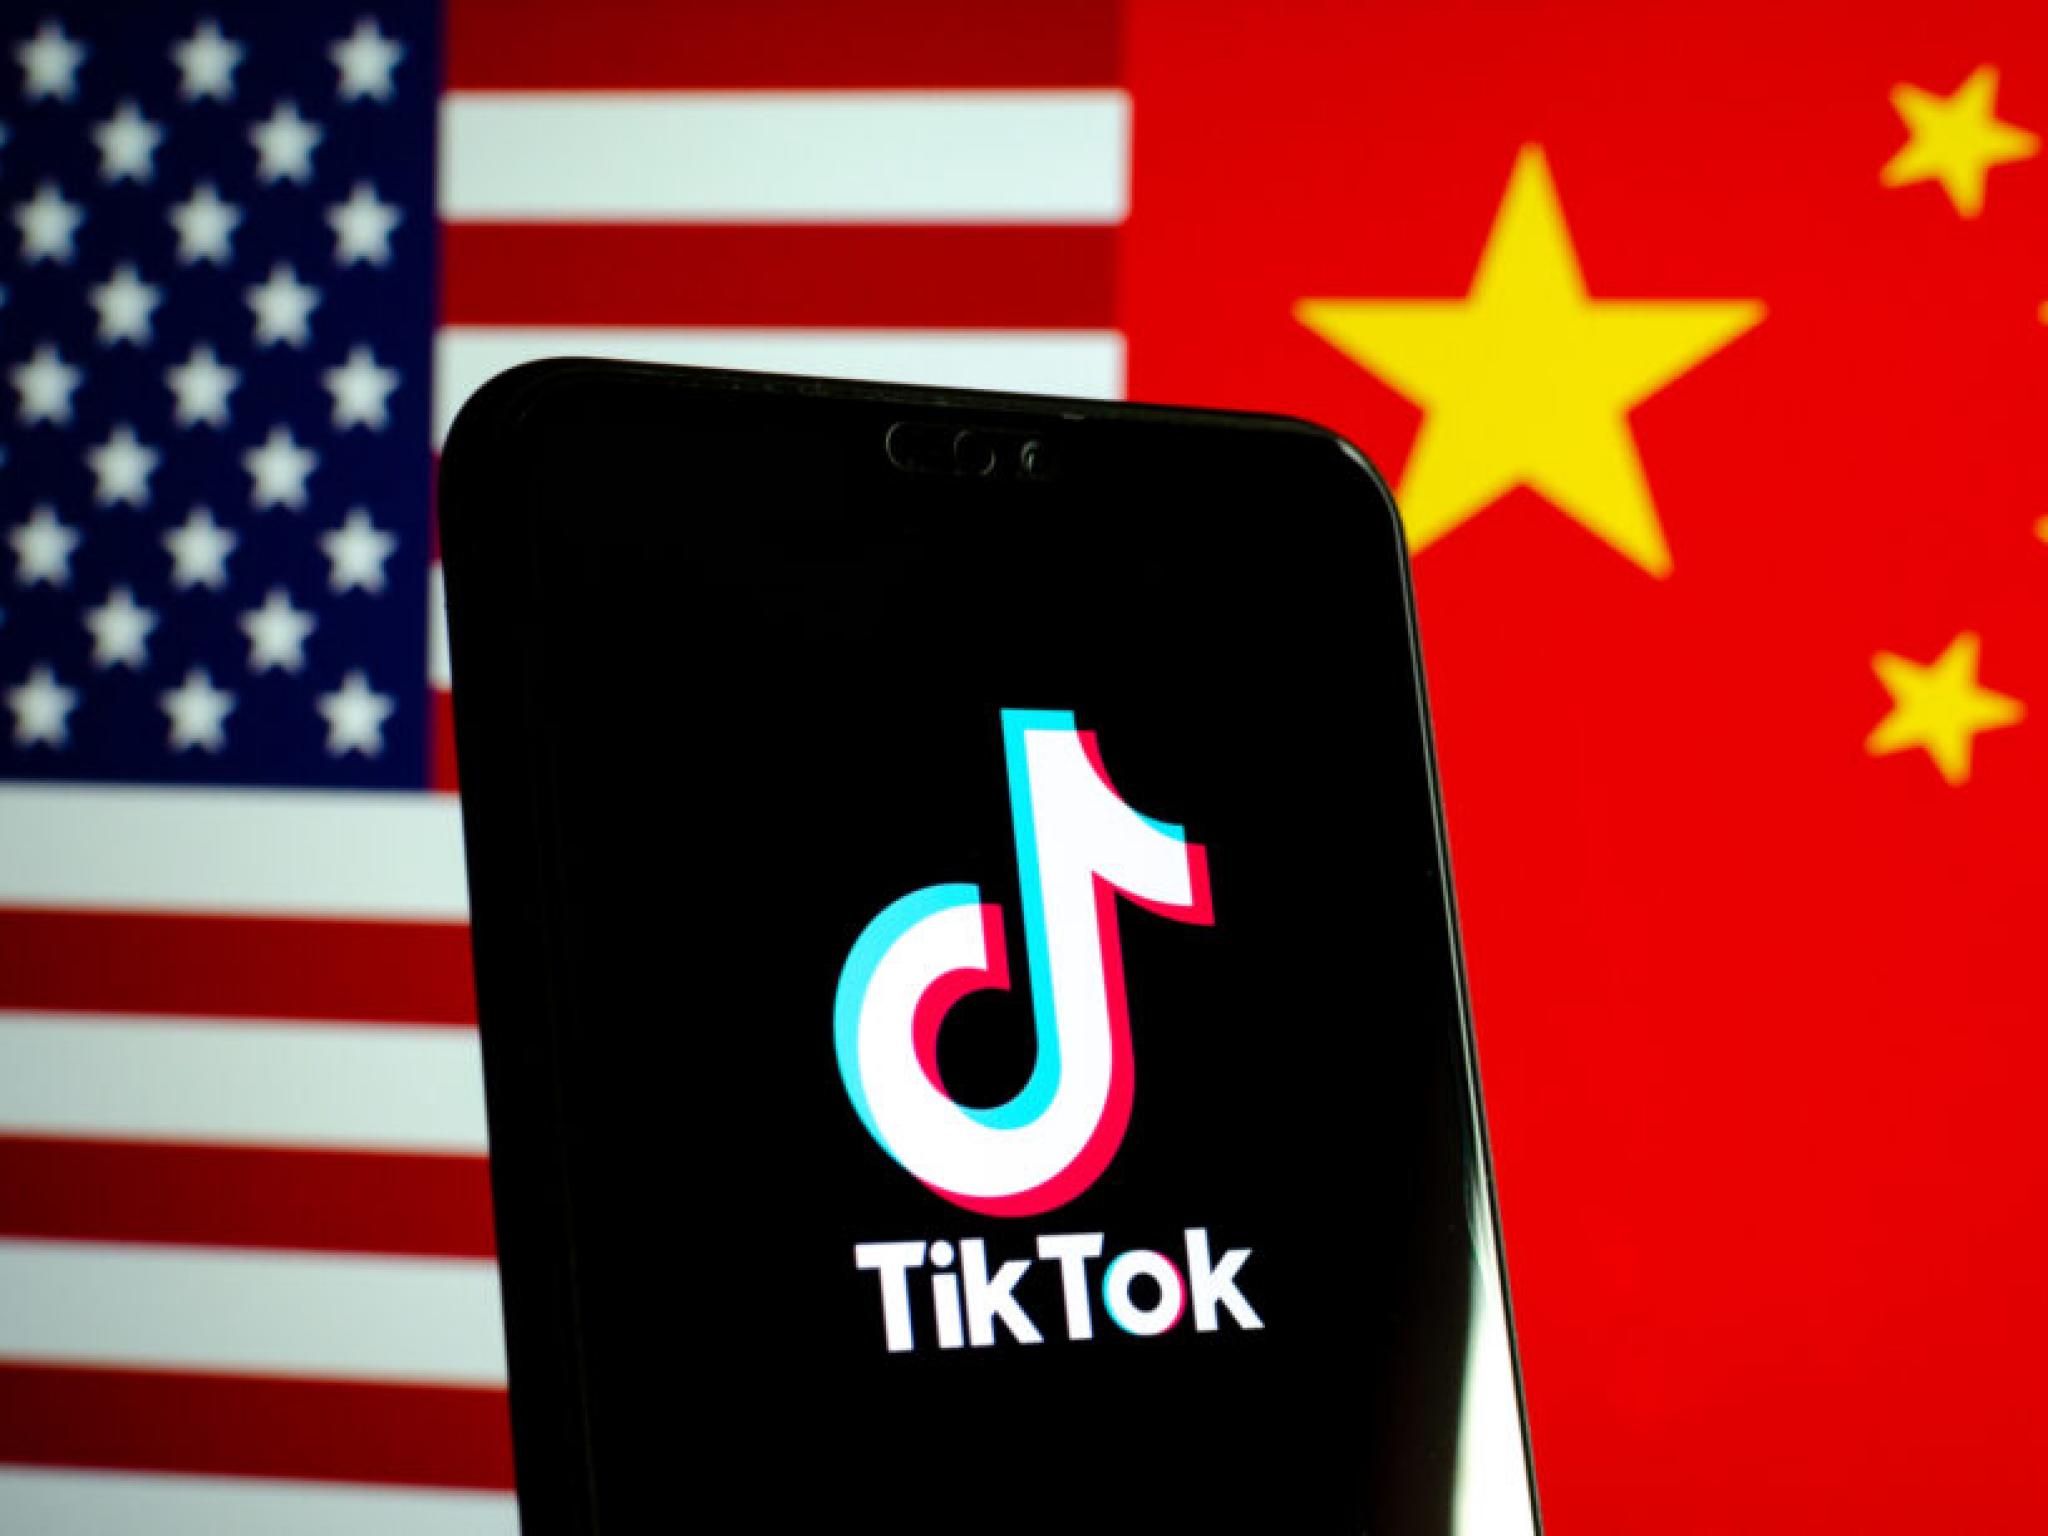  gop-senator-who-owns-meta-stock-denies-conflict-of-interest-ahead-of-tiktok-ban-vote-i-am-not-fighting-against-a-company 